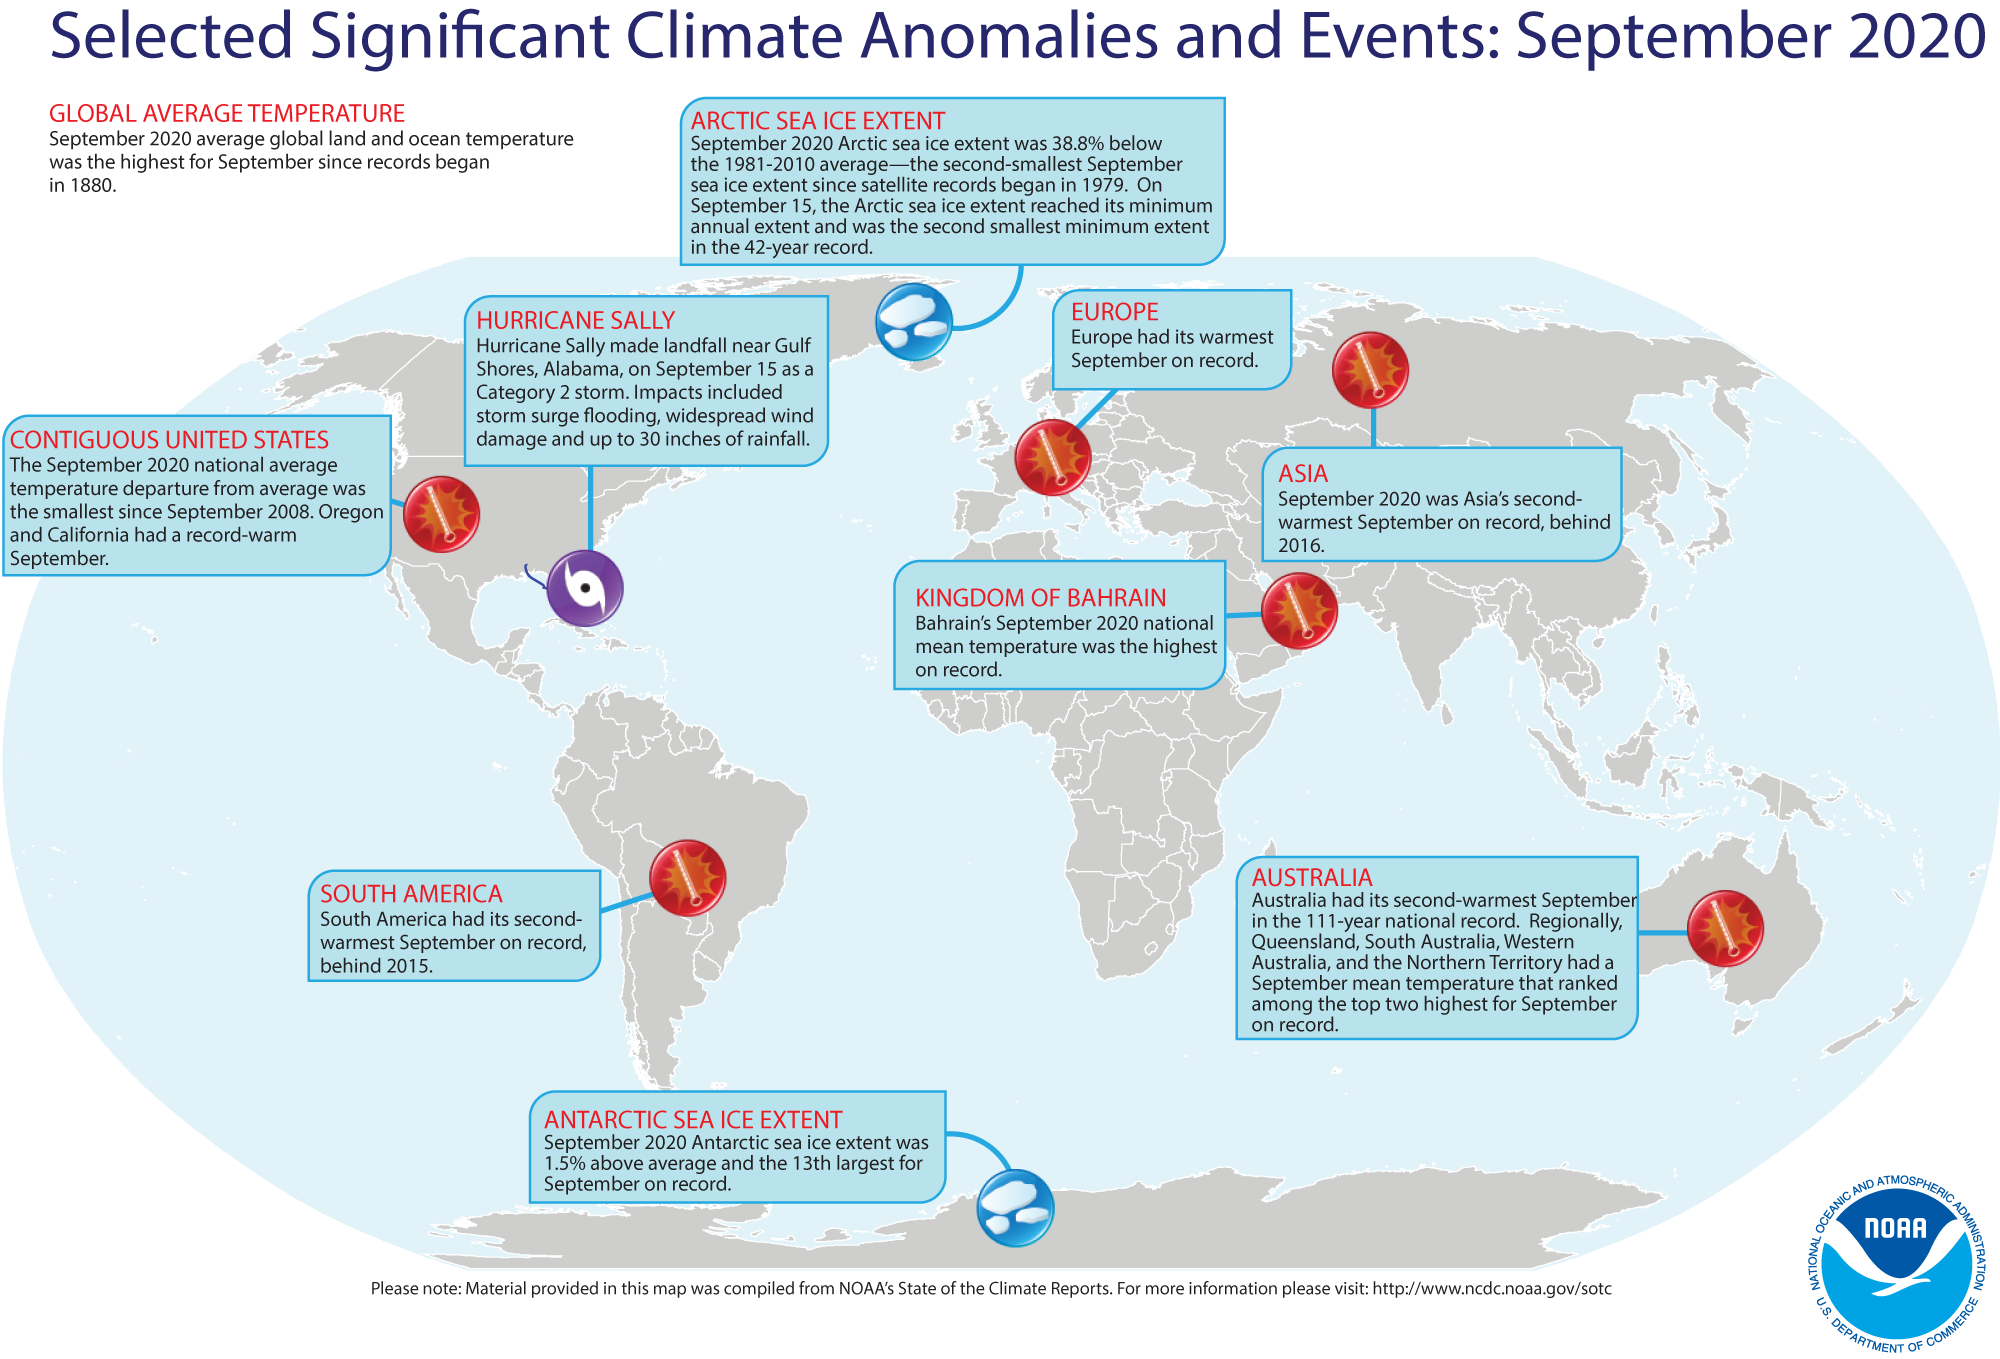 A map of the world plotted with some of the most significant weather and climate events that occurred during September 2020. For more details, see the bullets below in this story and more from the NOAA report at http://bit.ly/Global092020.